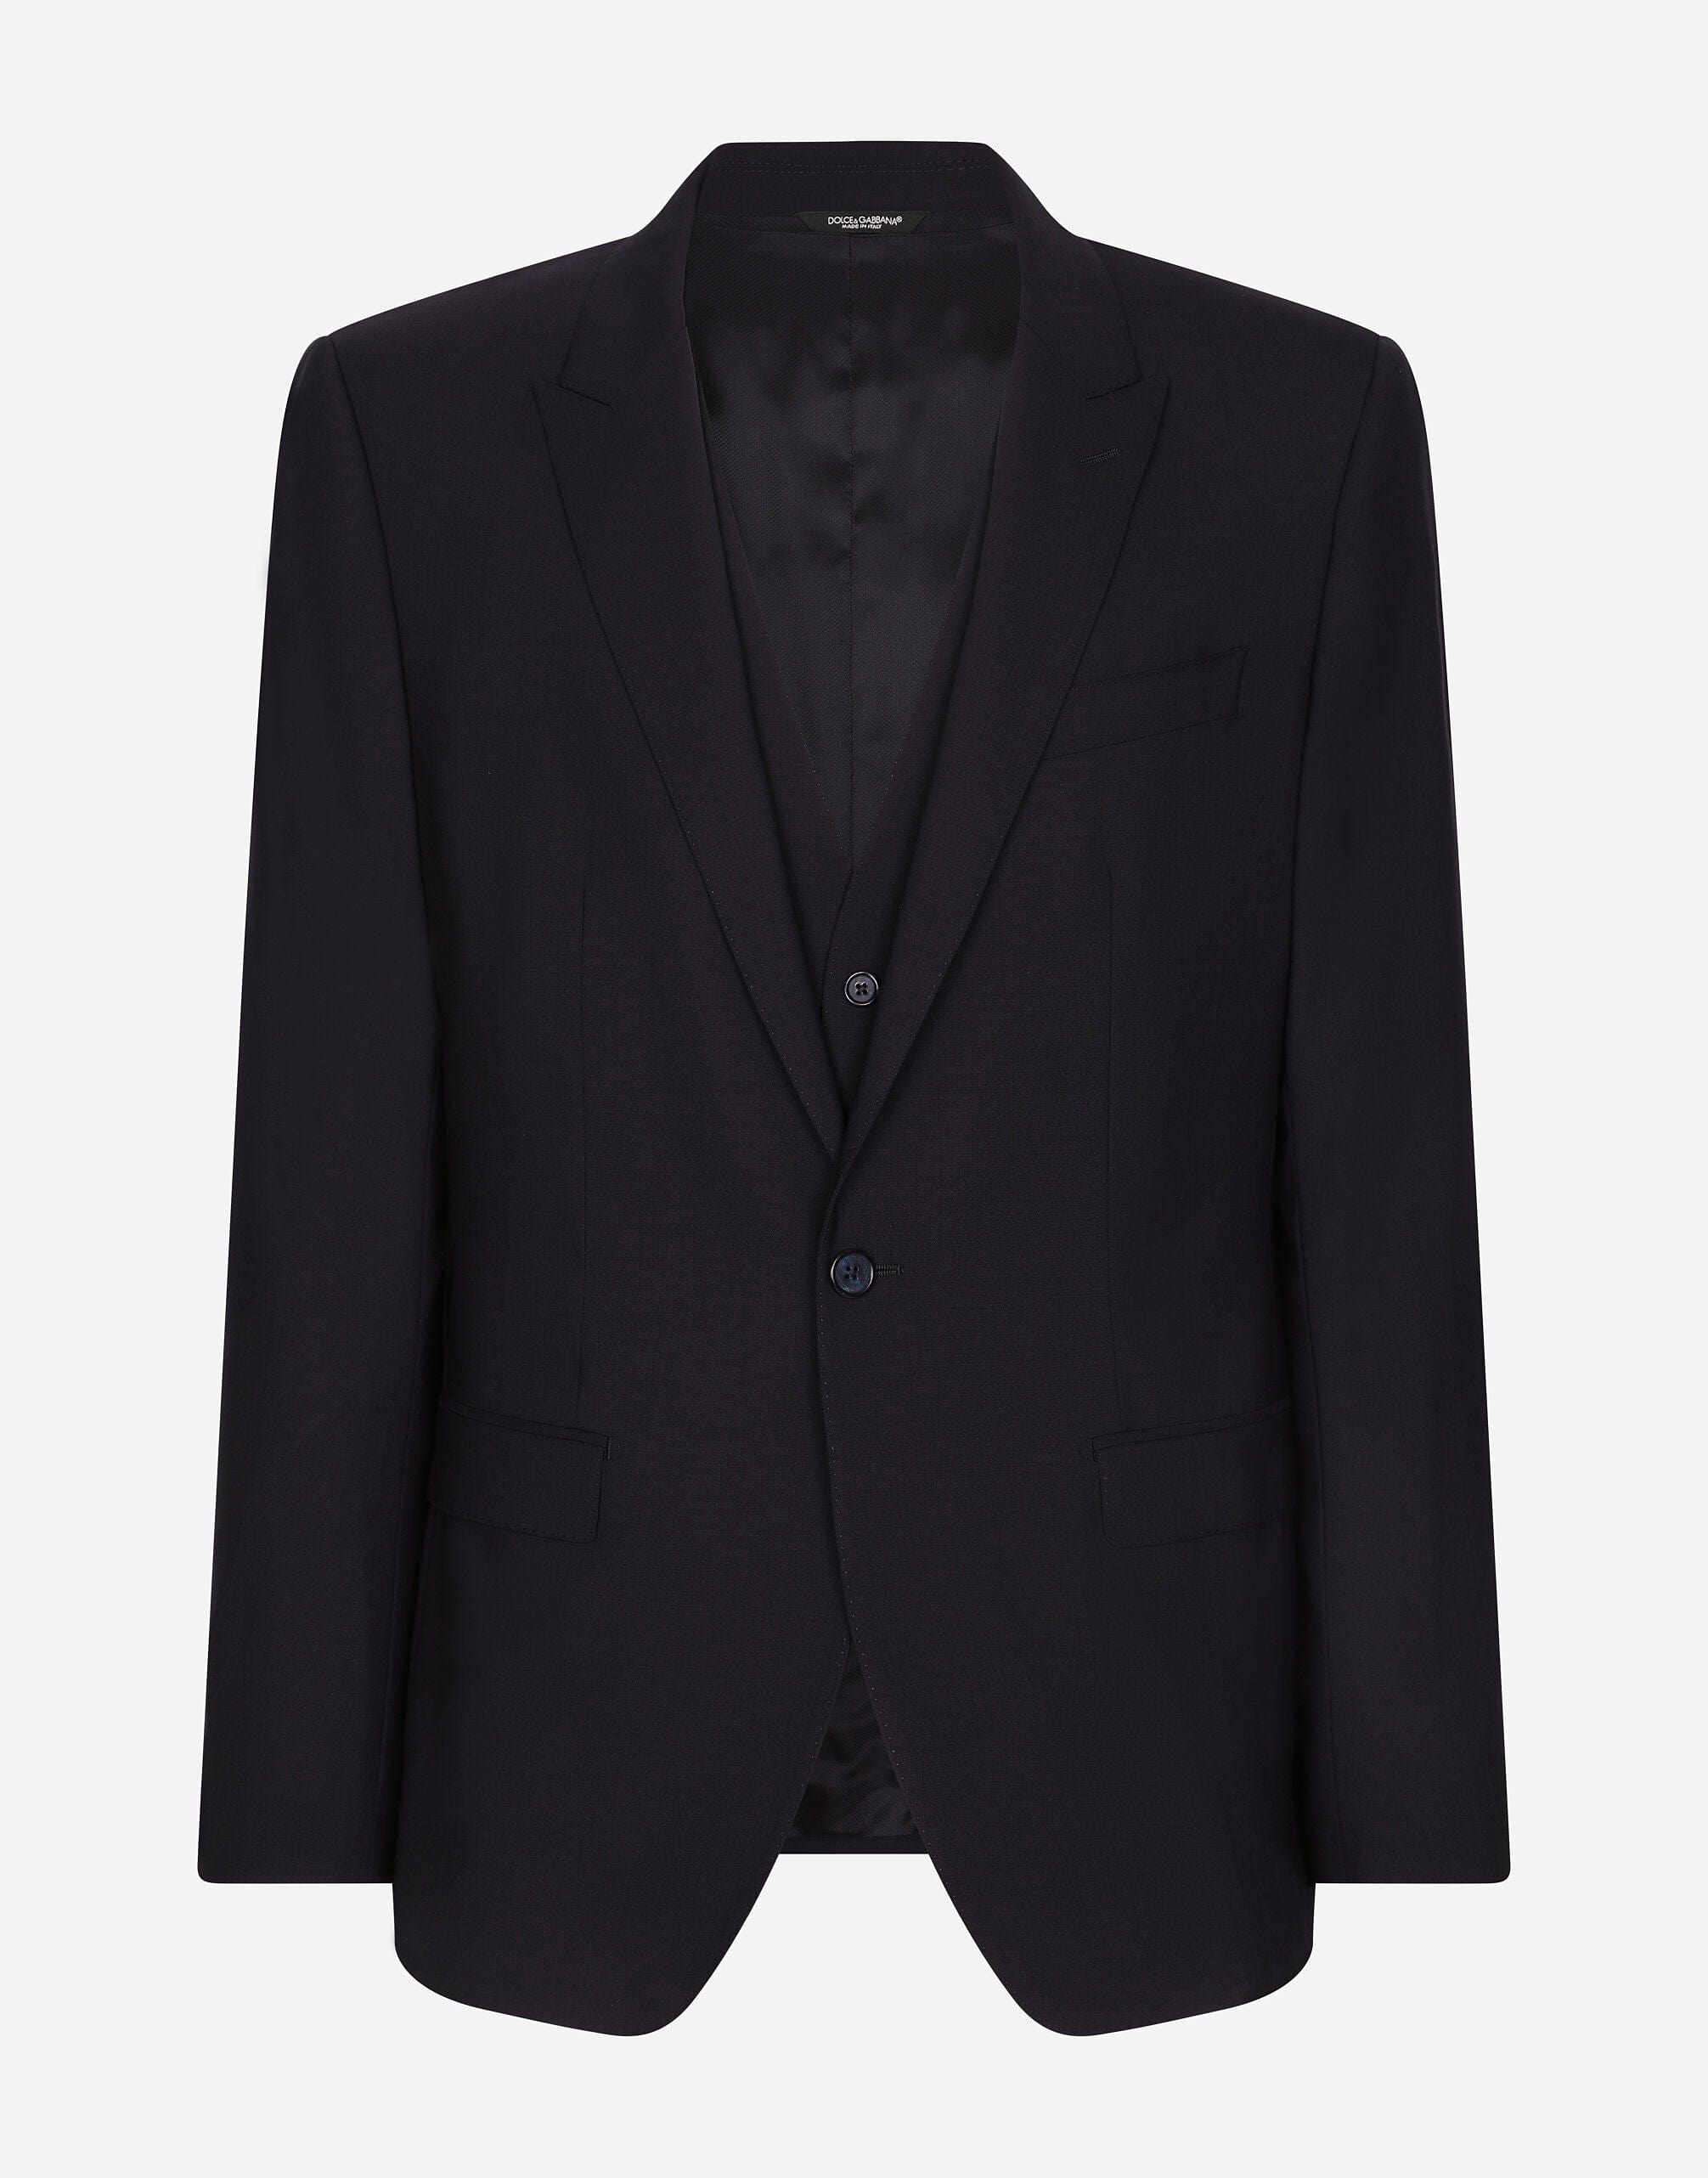 Dolce & Gabbana Stretch Wool Two-Piece Martini-Fit Suit